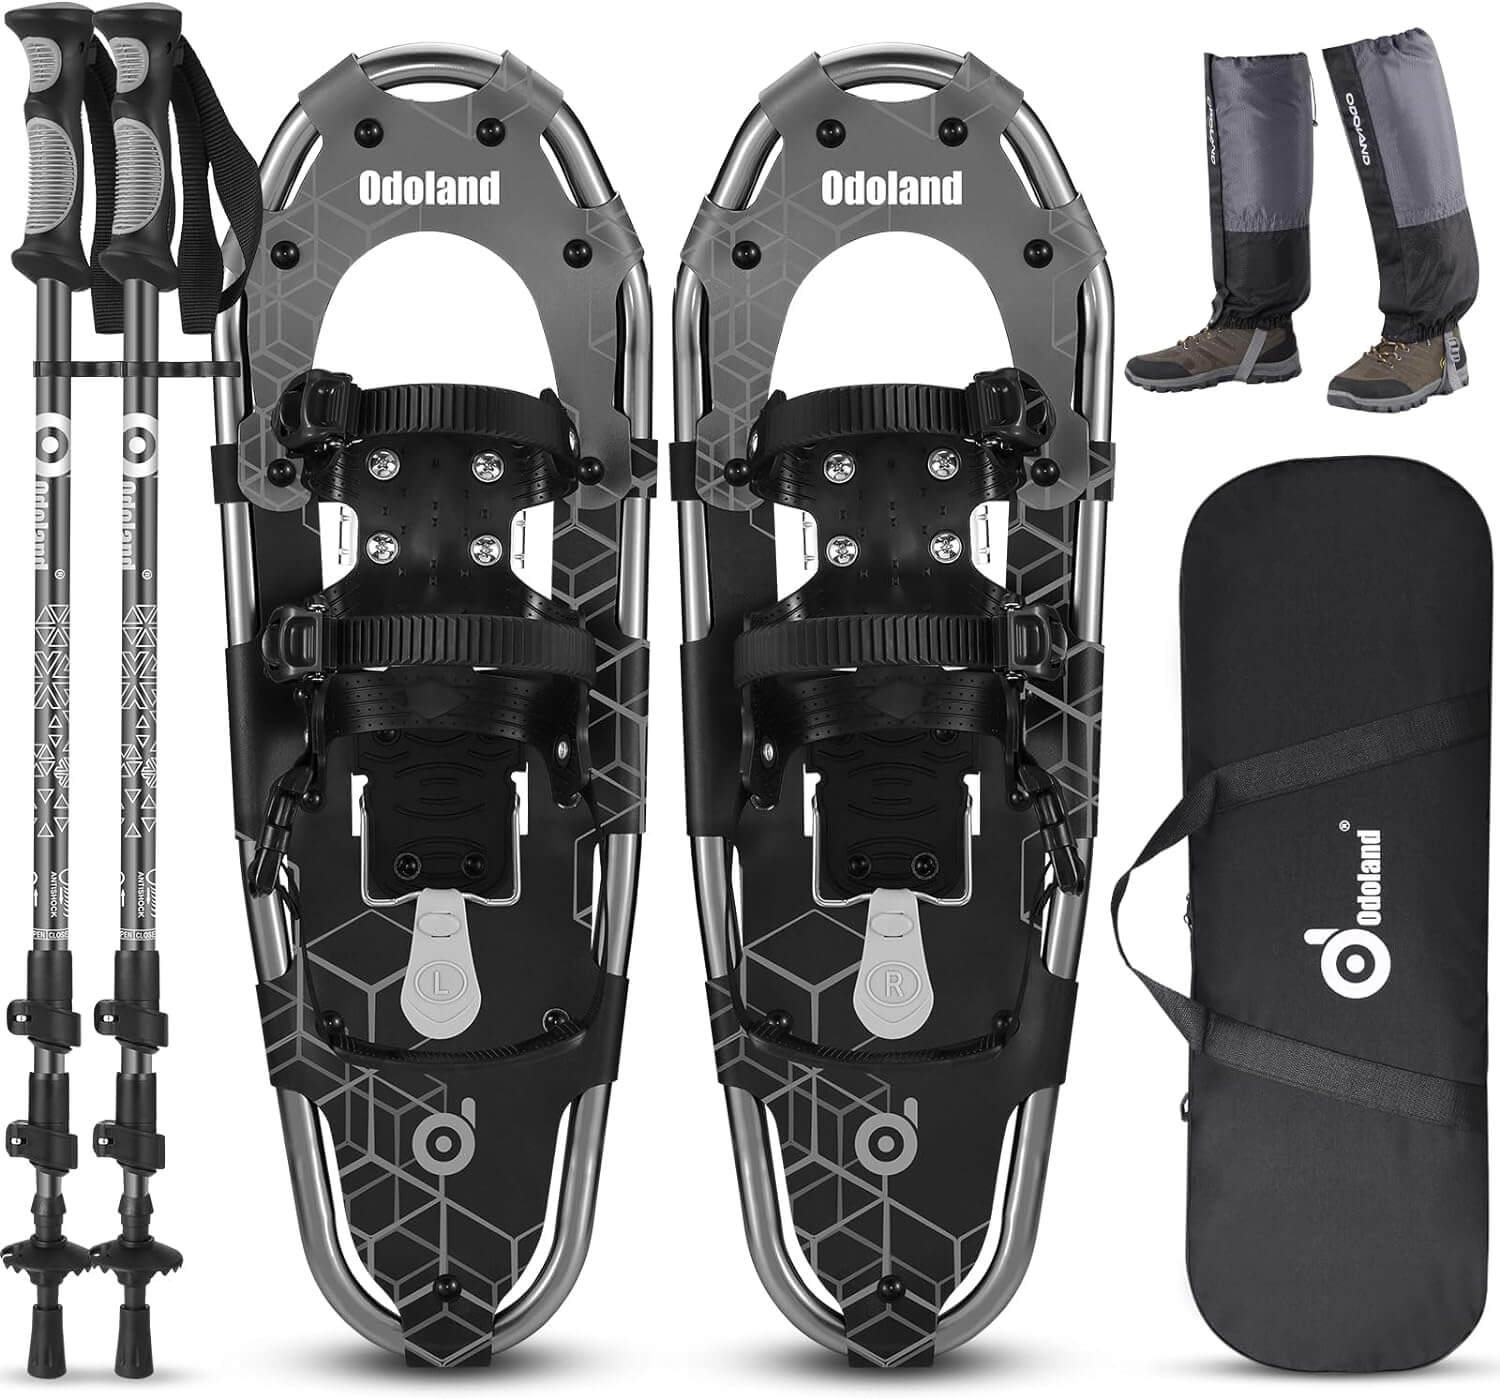 Shop The Latest >4-in-1 Snowshoes Set-Trekking Poles, Snow Leg Gaiters & Bag > *Only $133.64*> From The Top Brand > *Odolandl* > Shop Now and Get Free Shipping On Orders Over $45.00 >*Shop Earth Foot*